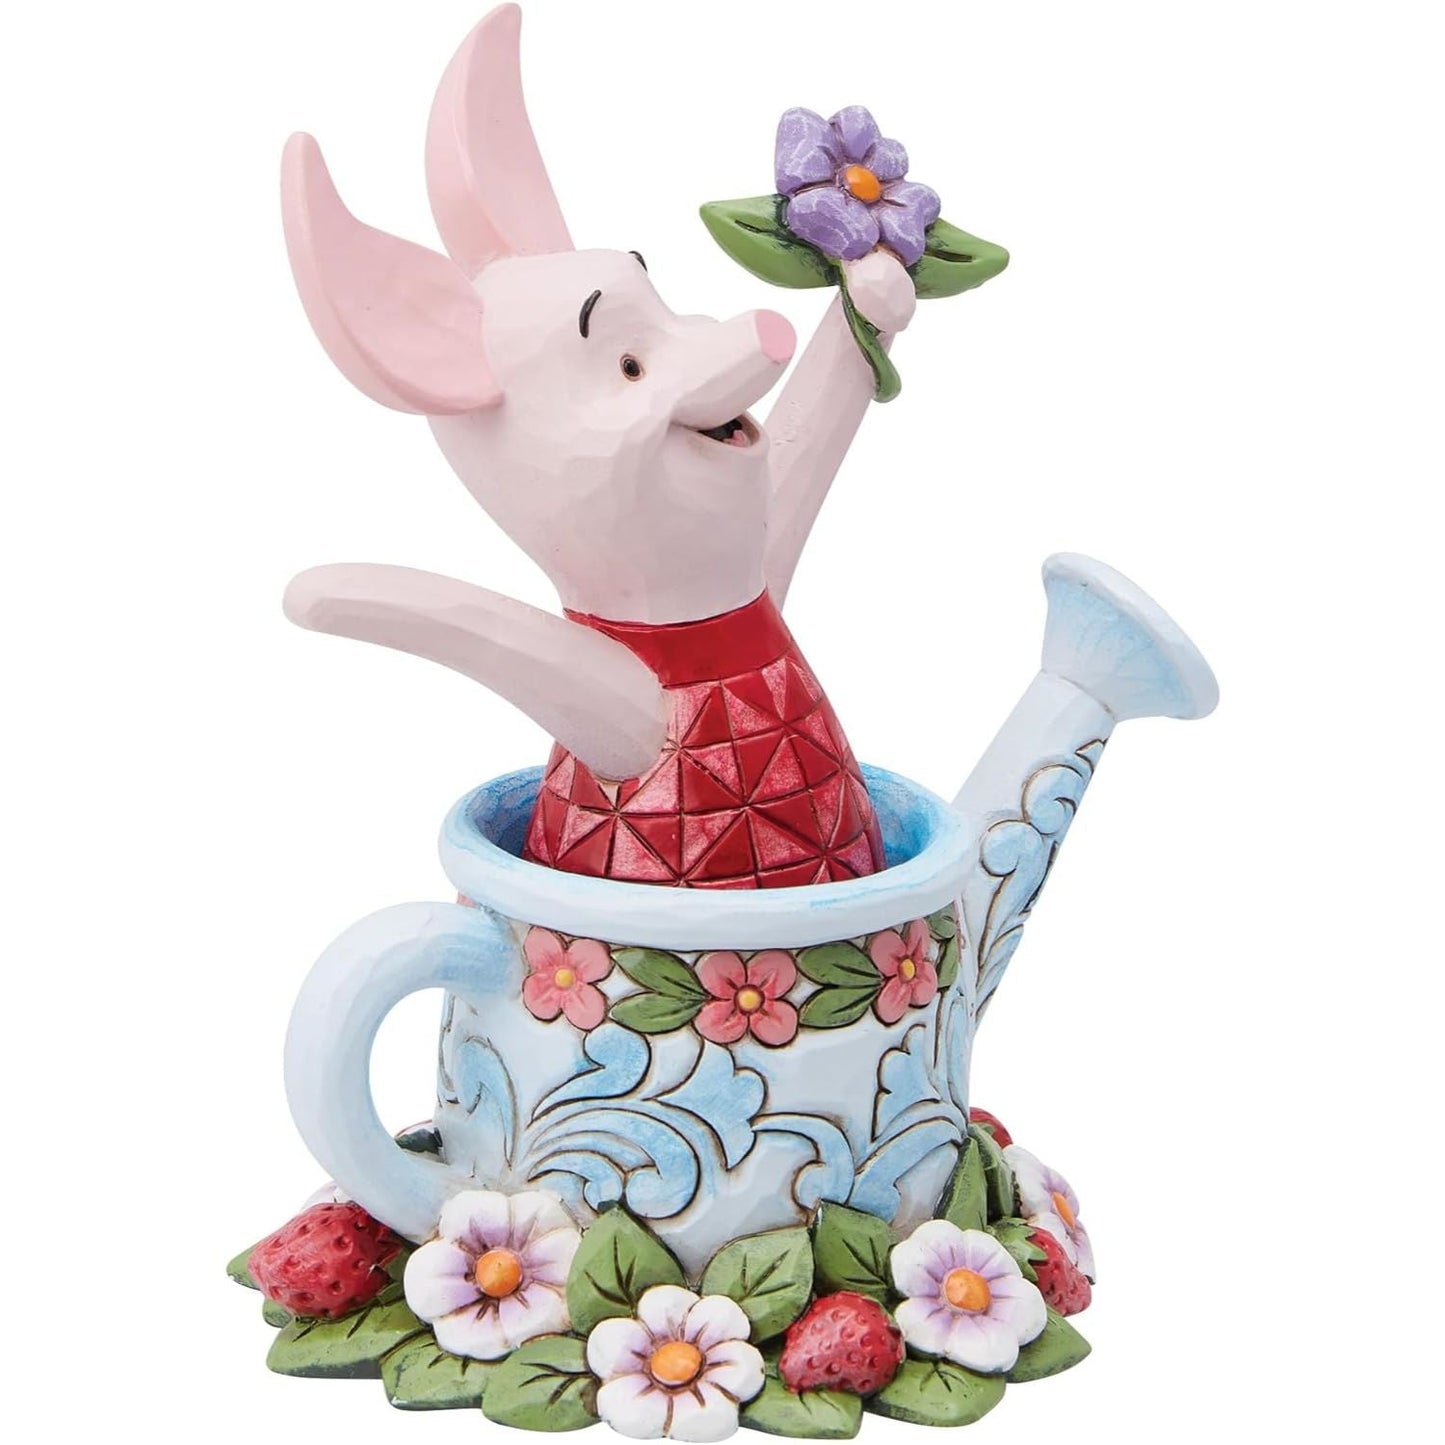 Disney Traditions by Jim Shore Winnie The Pooh Piglet in Watering Can Figurine, 4.5"